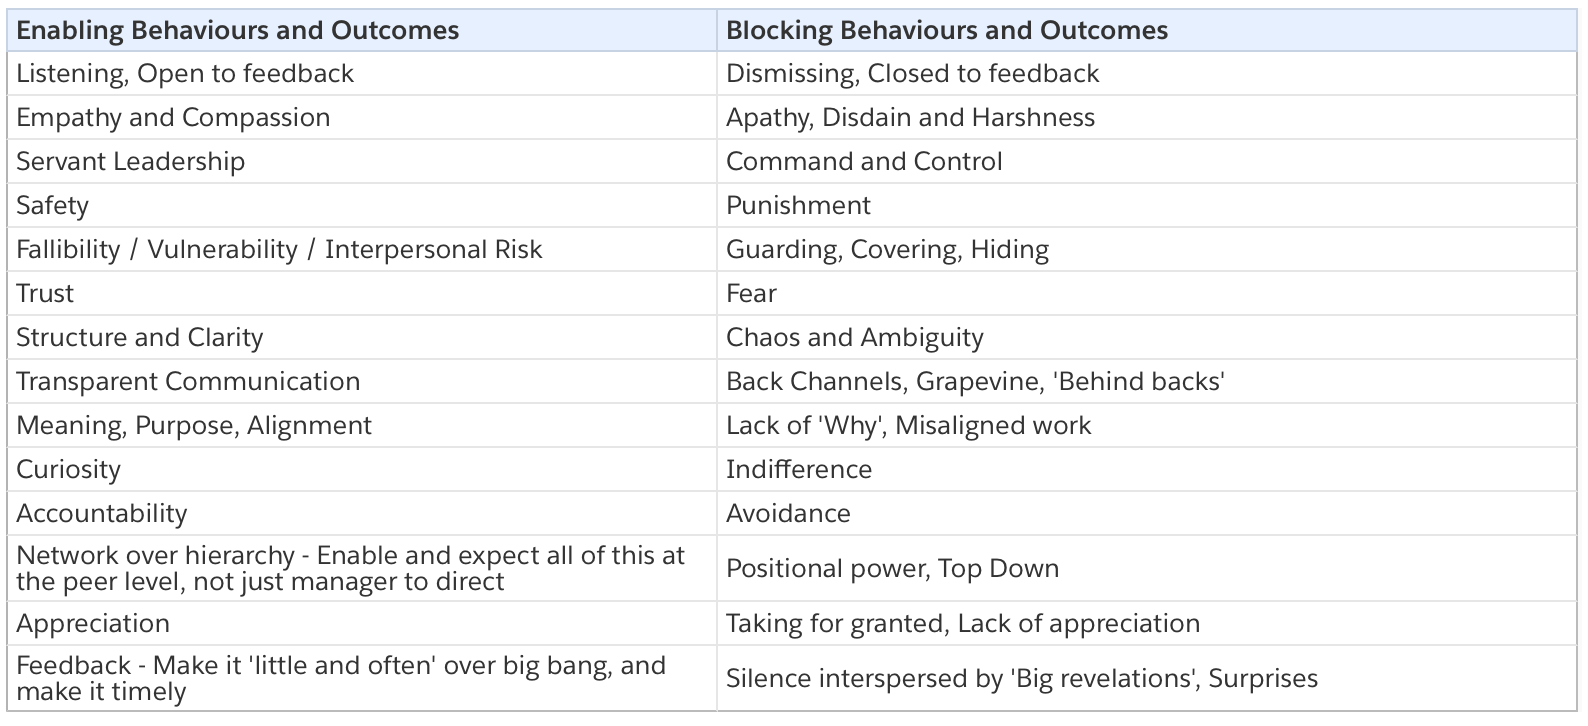 Enablers and Blockers in Psychological Safety